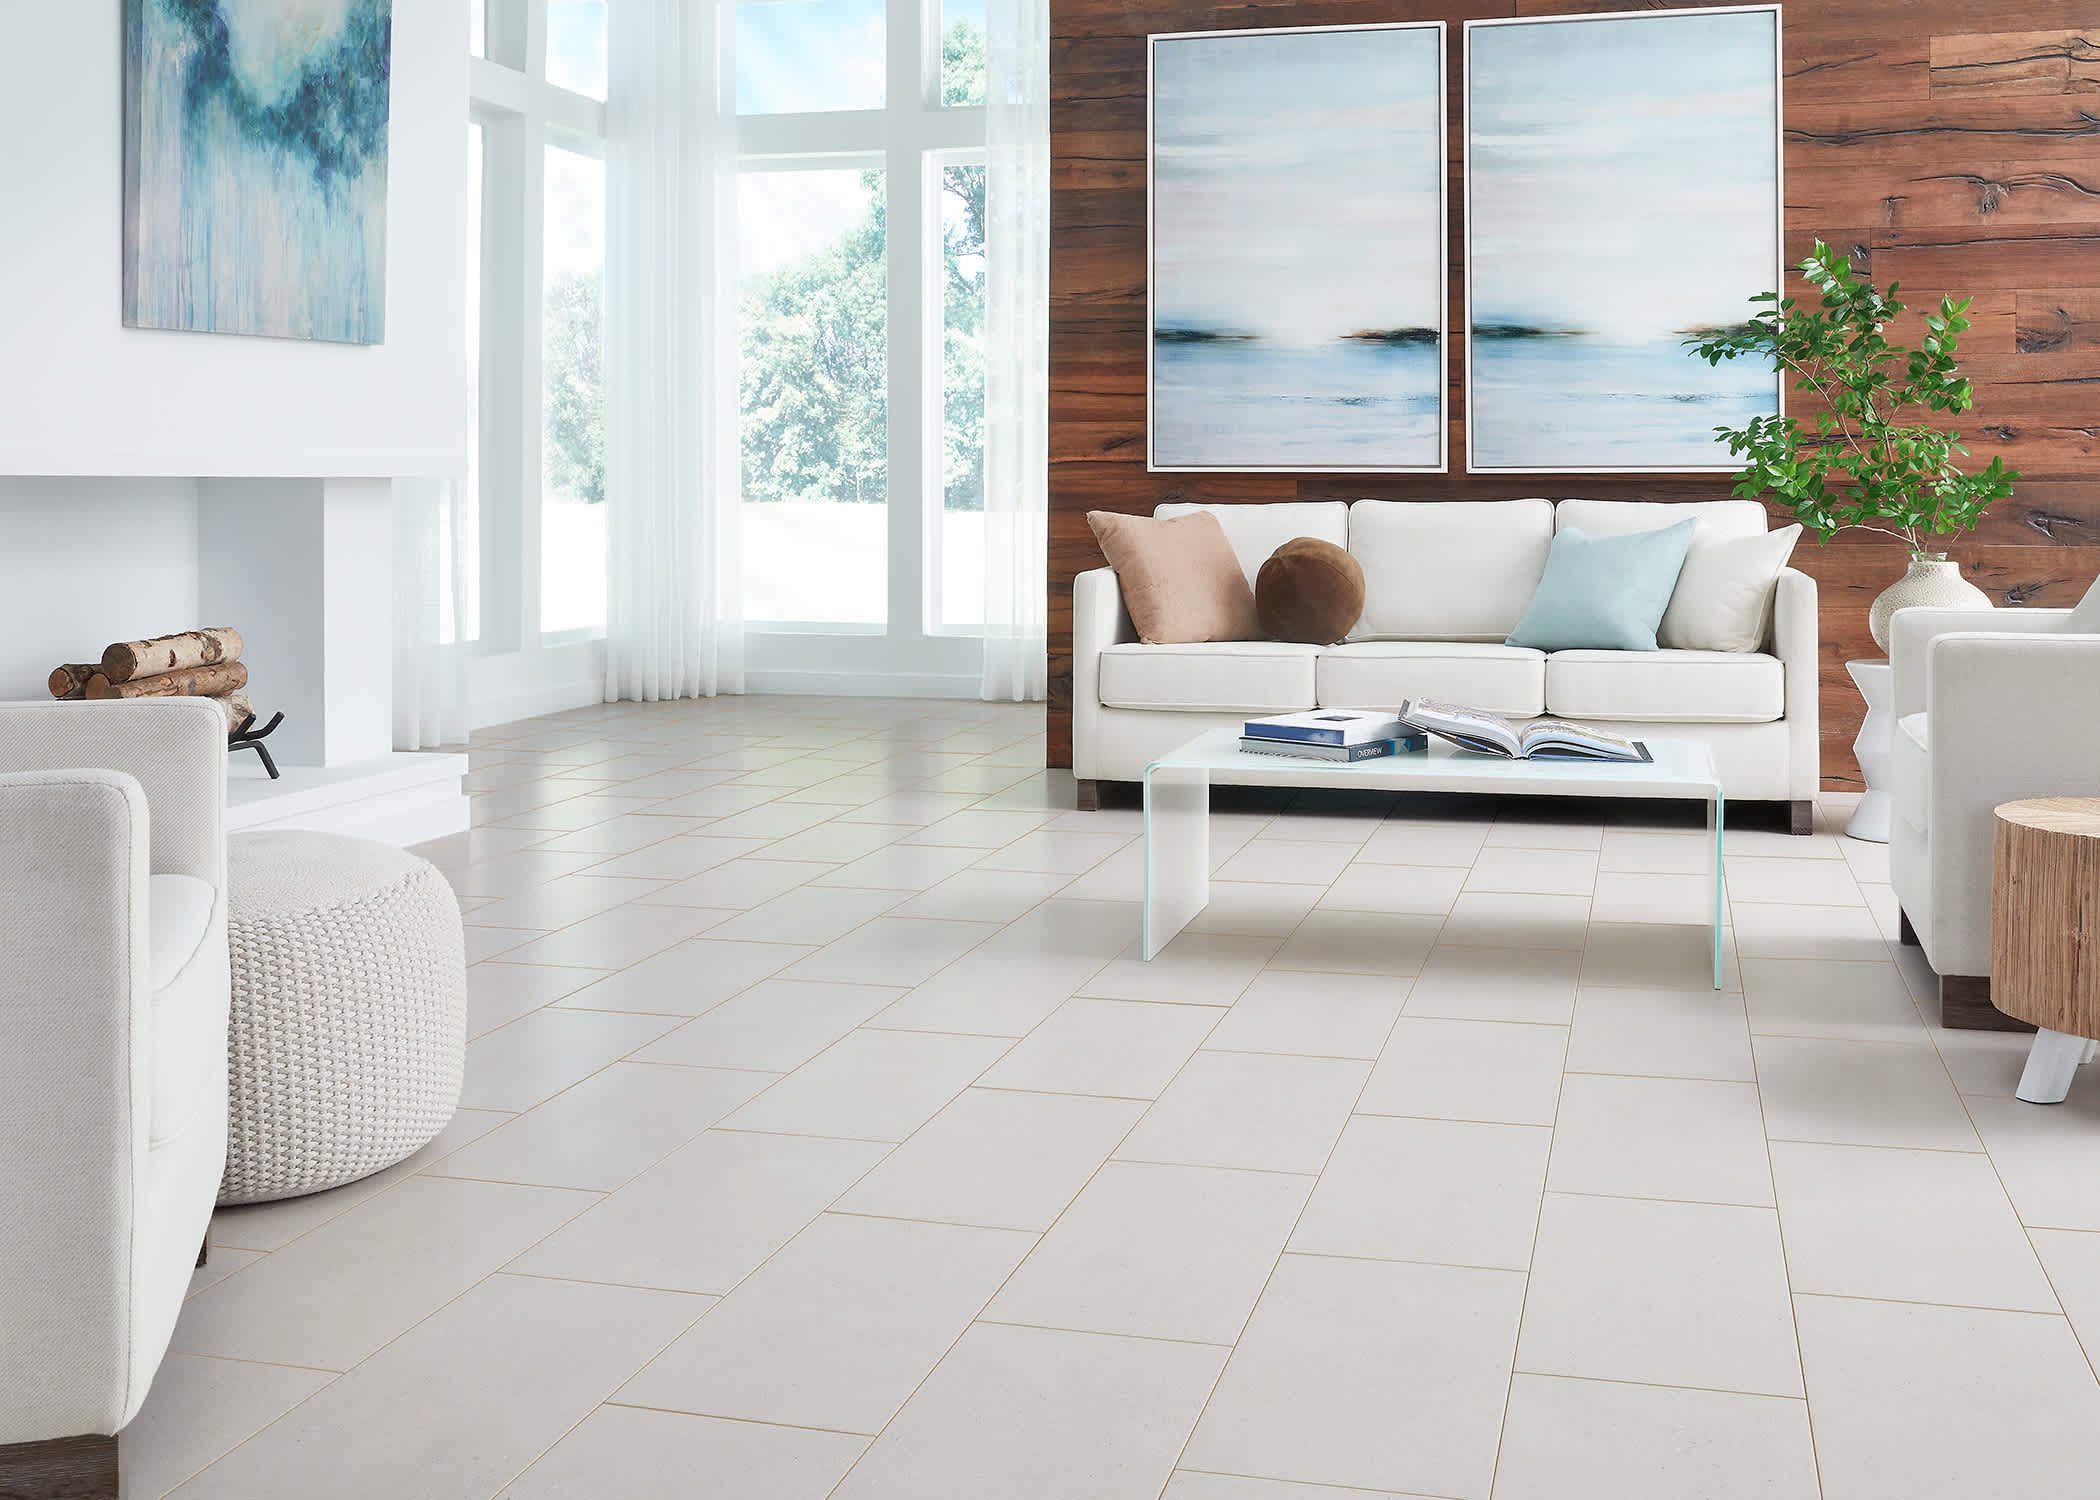 Image of living room with tile installed on the floor